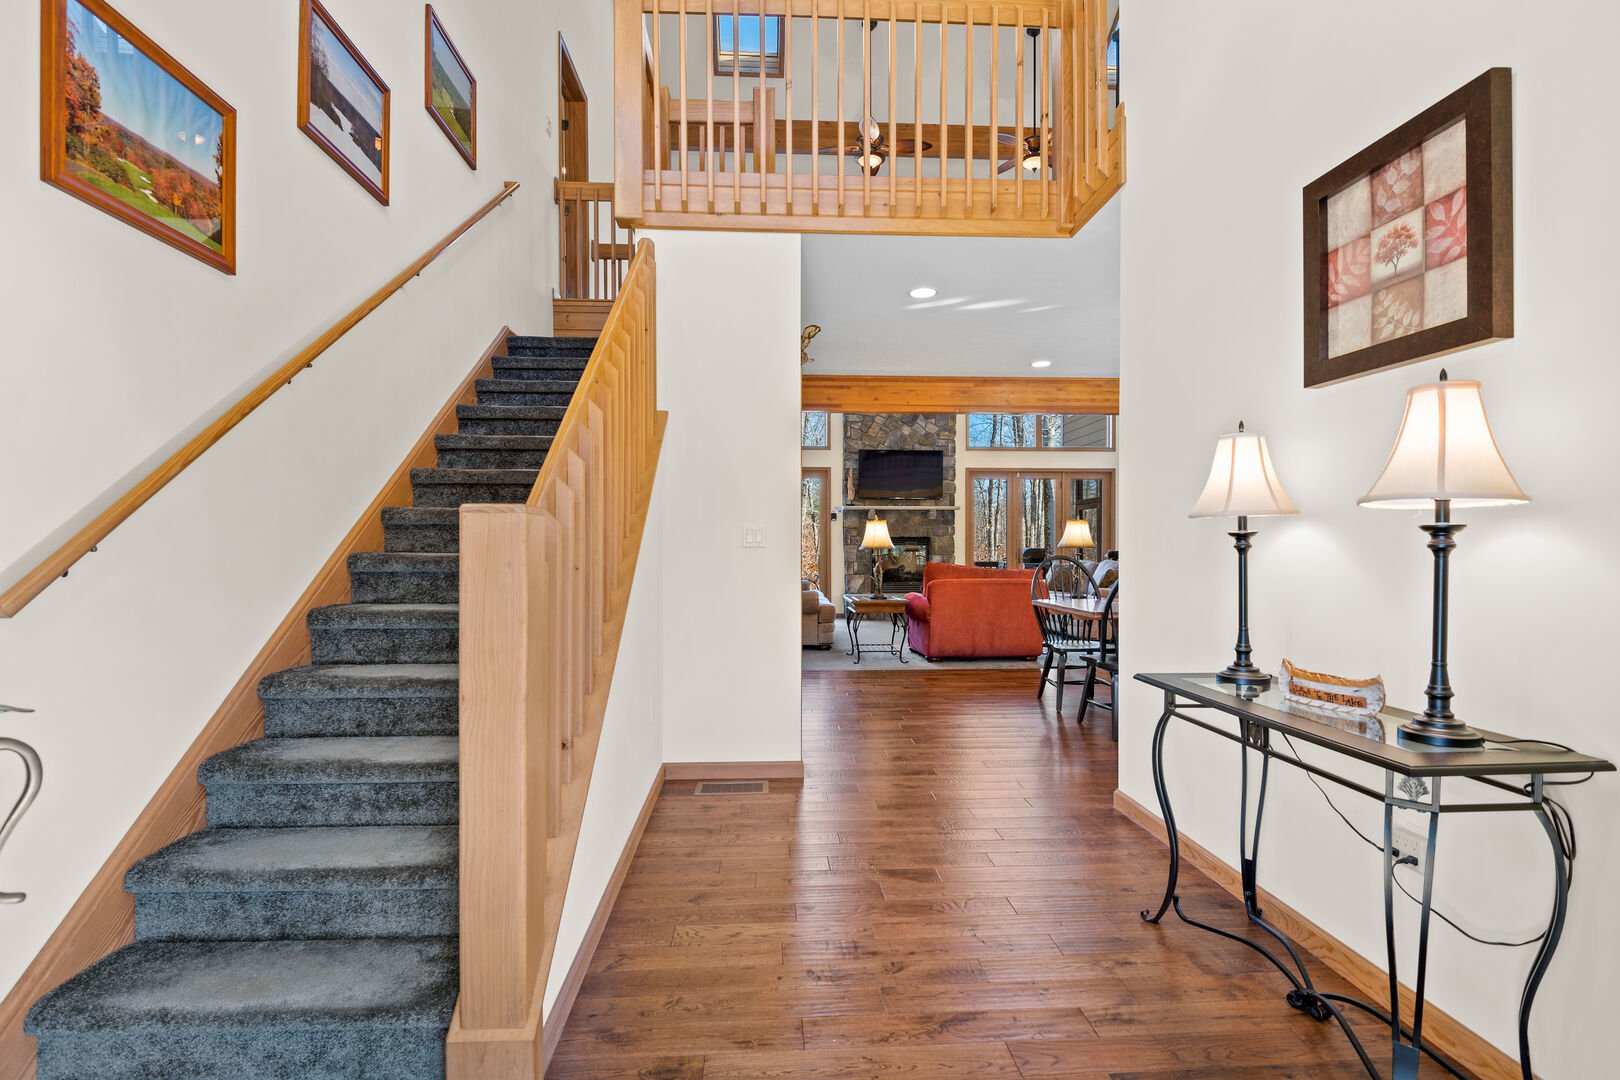 Stairs and Hallway at the Tricky Tee Poconos Vacation Rental